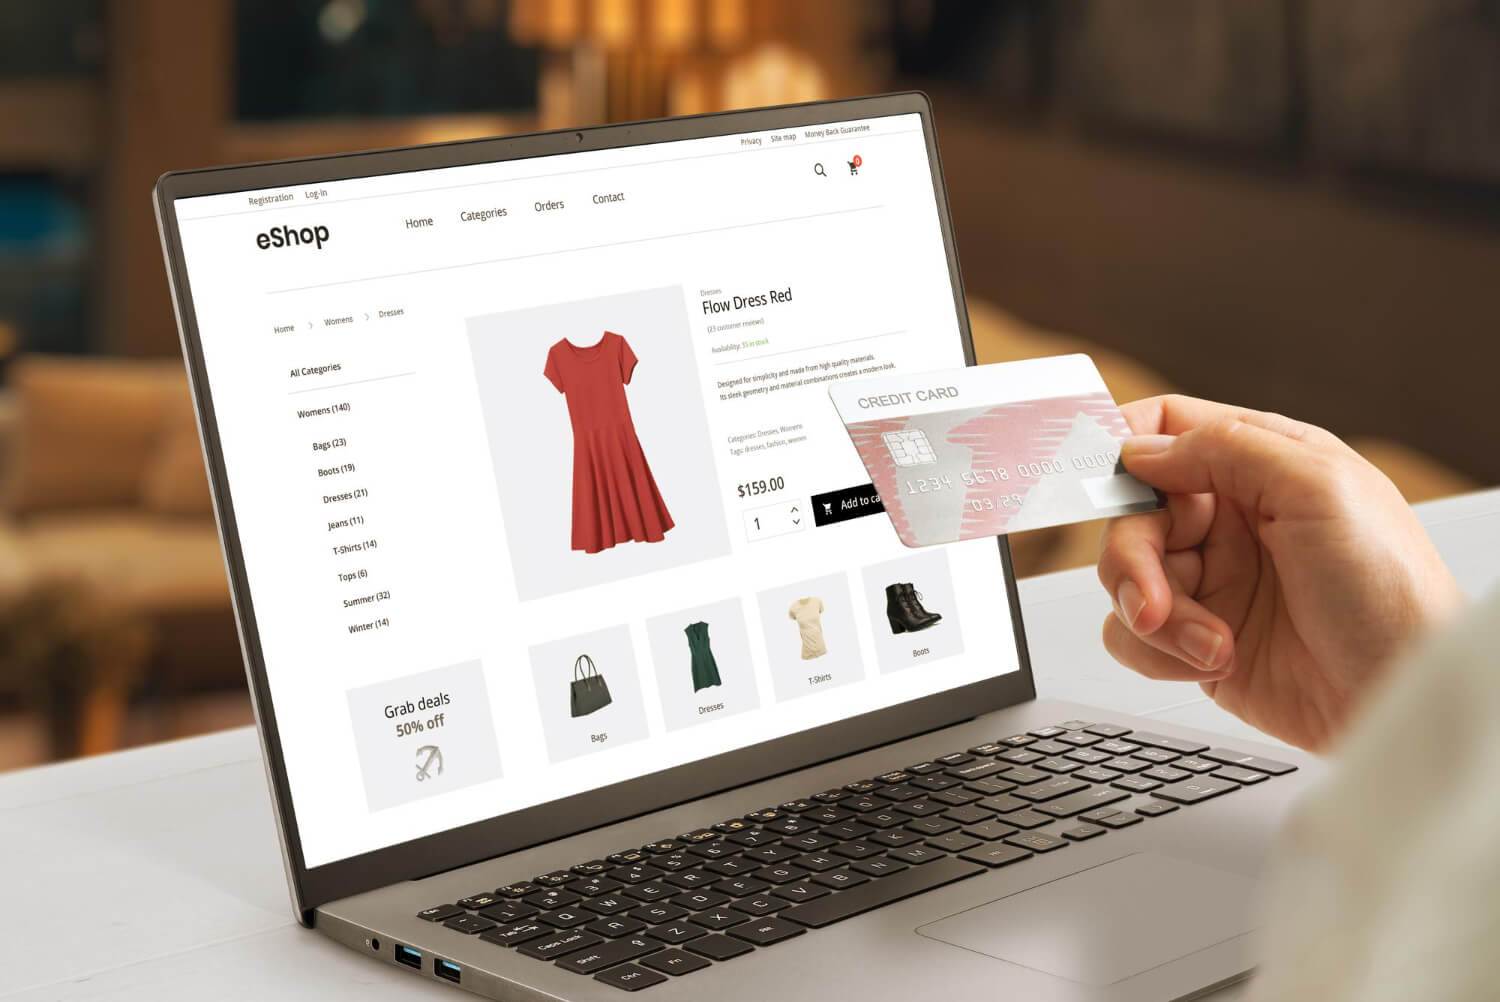 What are the best eCommerce platforms